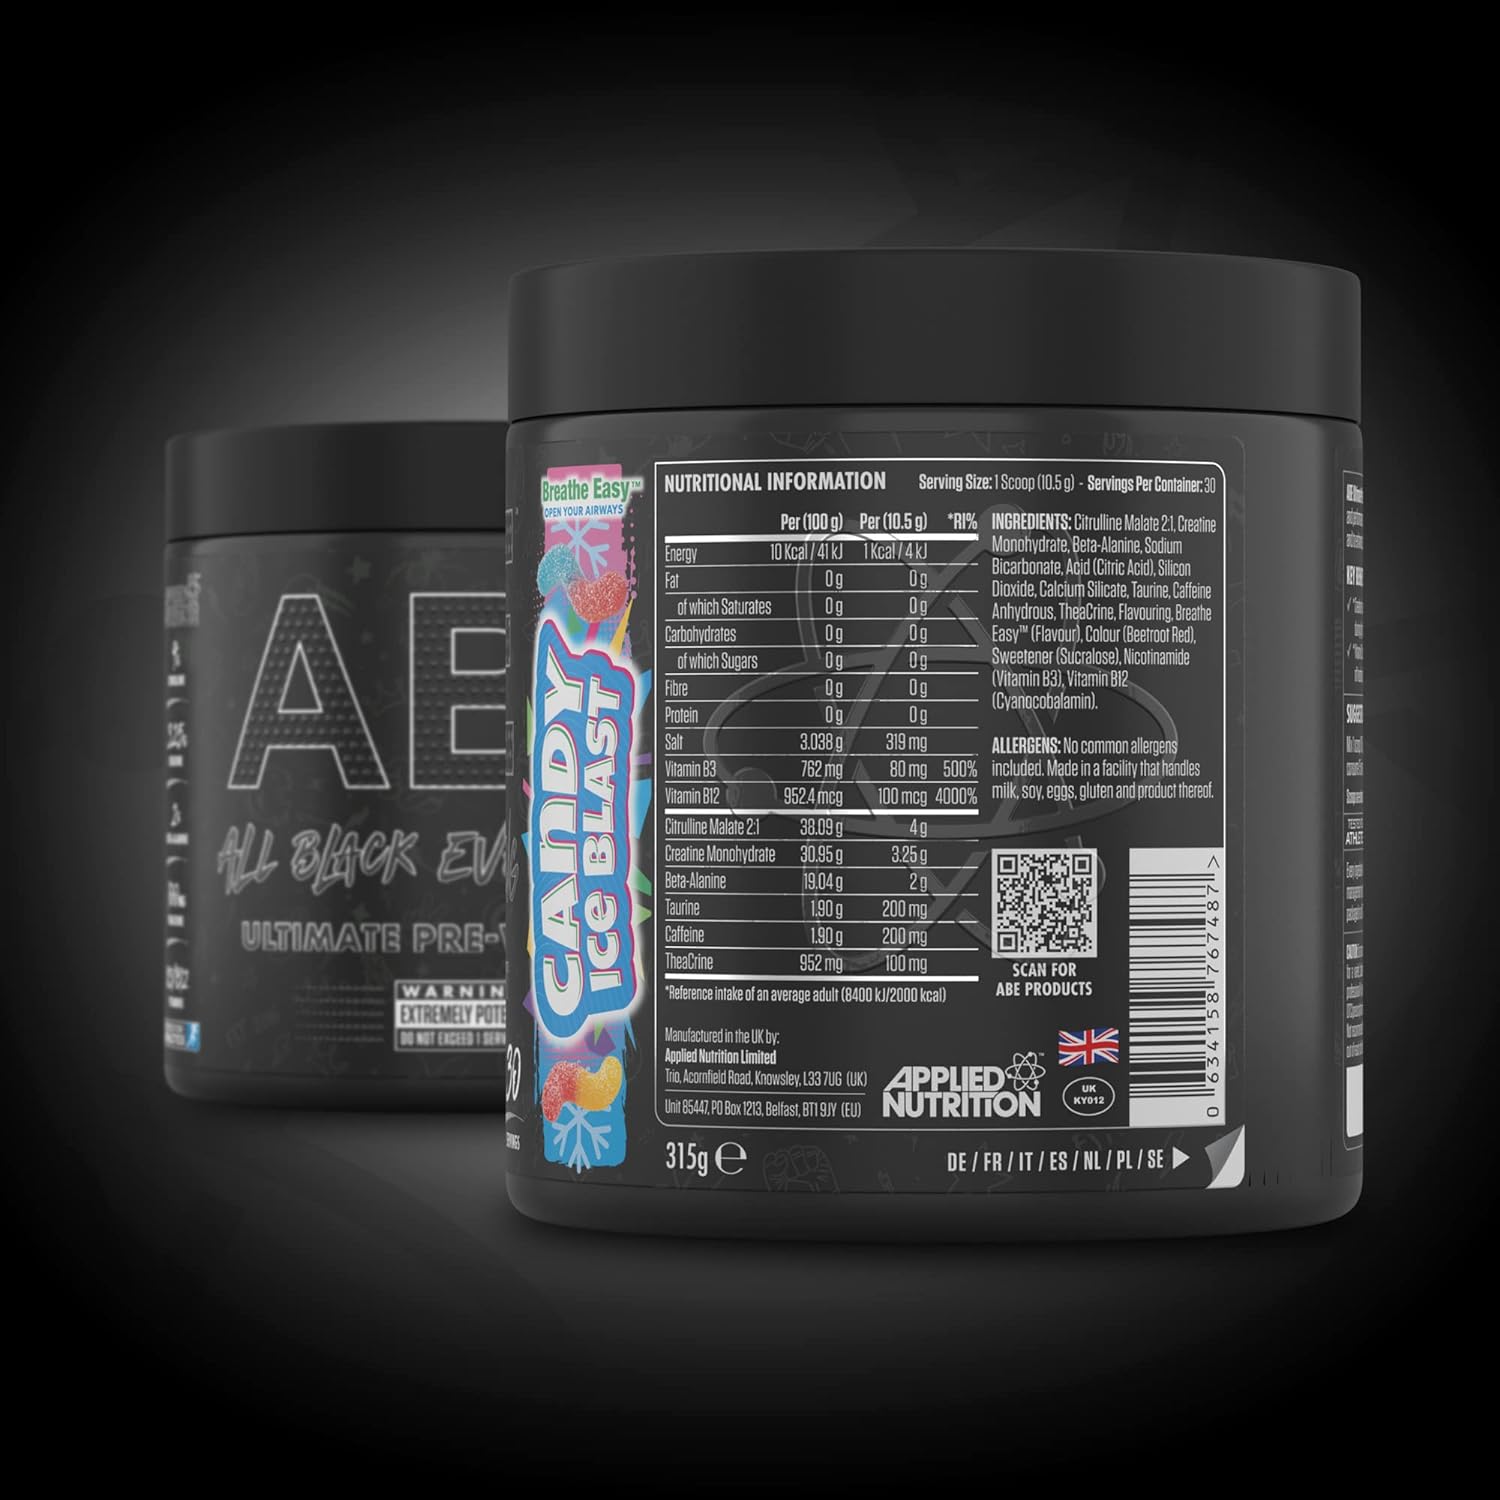 Applied Nutrition Abe Ultimate Pre-Workout Candy Ice Blast, 315 G - Pack May Vary